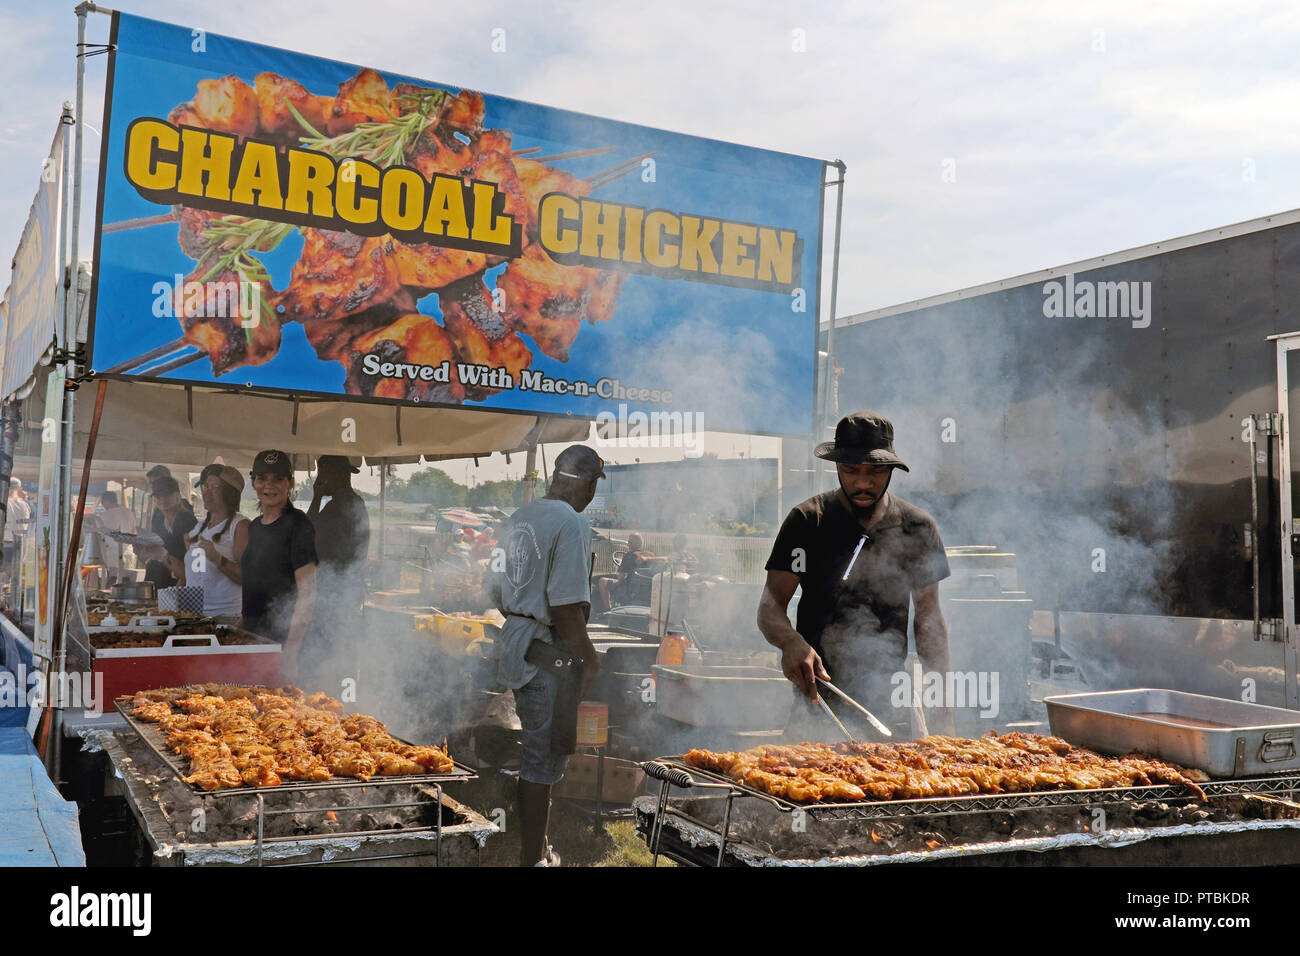 Charcoal grilled chicken being cooked outdoors en masse at the 2018 Cleveland Air Show in Cleveland, Ohio, USA. Stock Photo